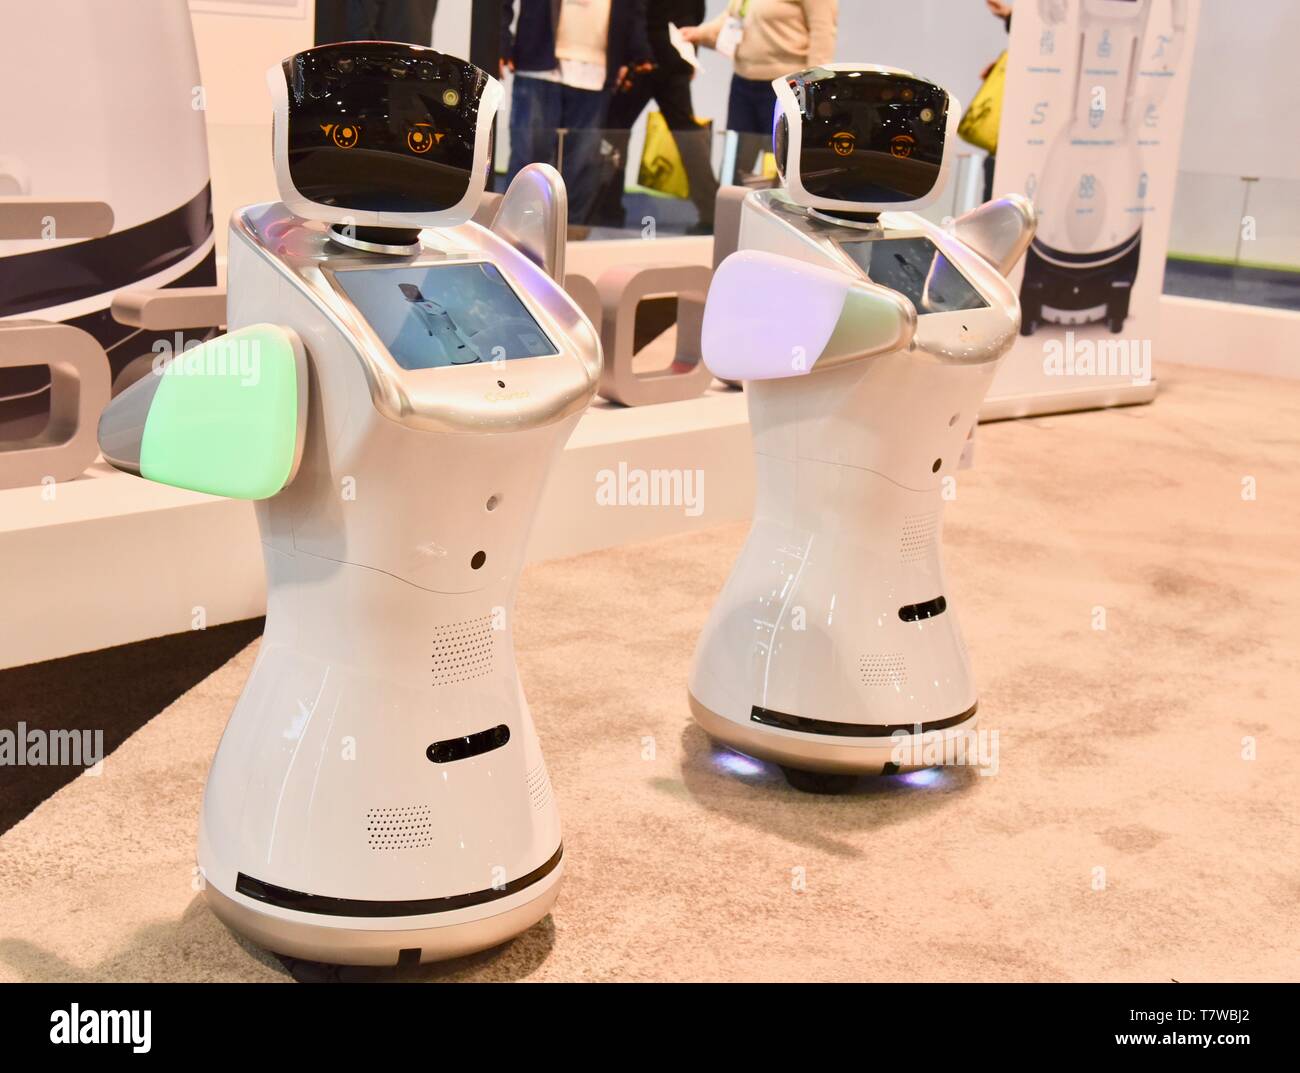 Sanbot Max robots, standing and offered as service robots, on display at CES, Las Vegas, USA Stock Photo